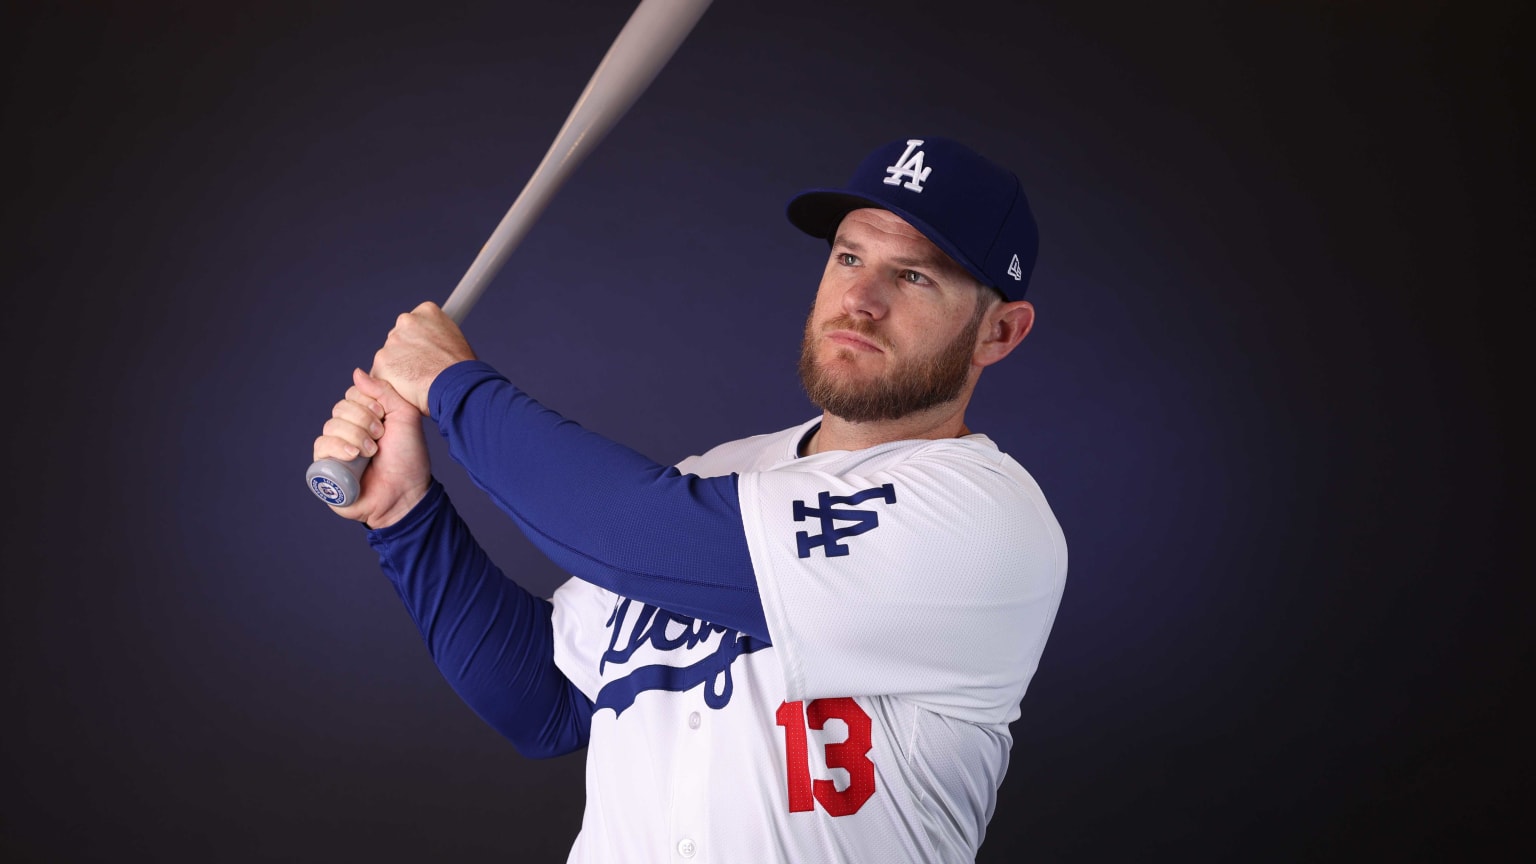 Chatting Practice with Max Muncy